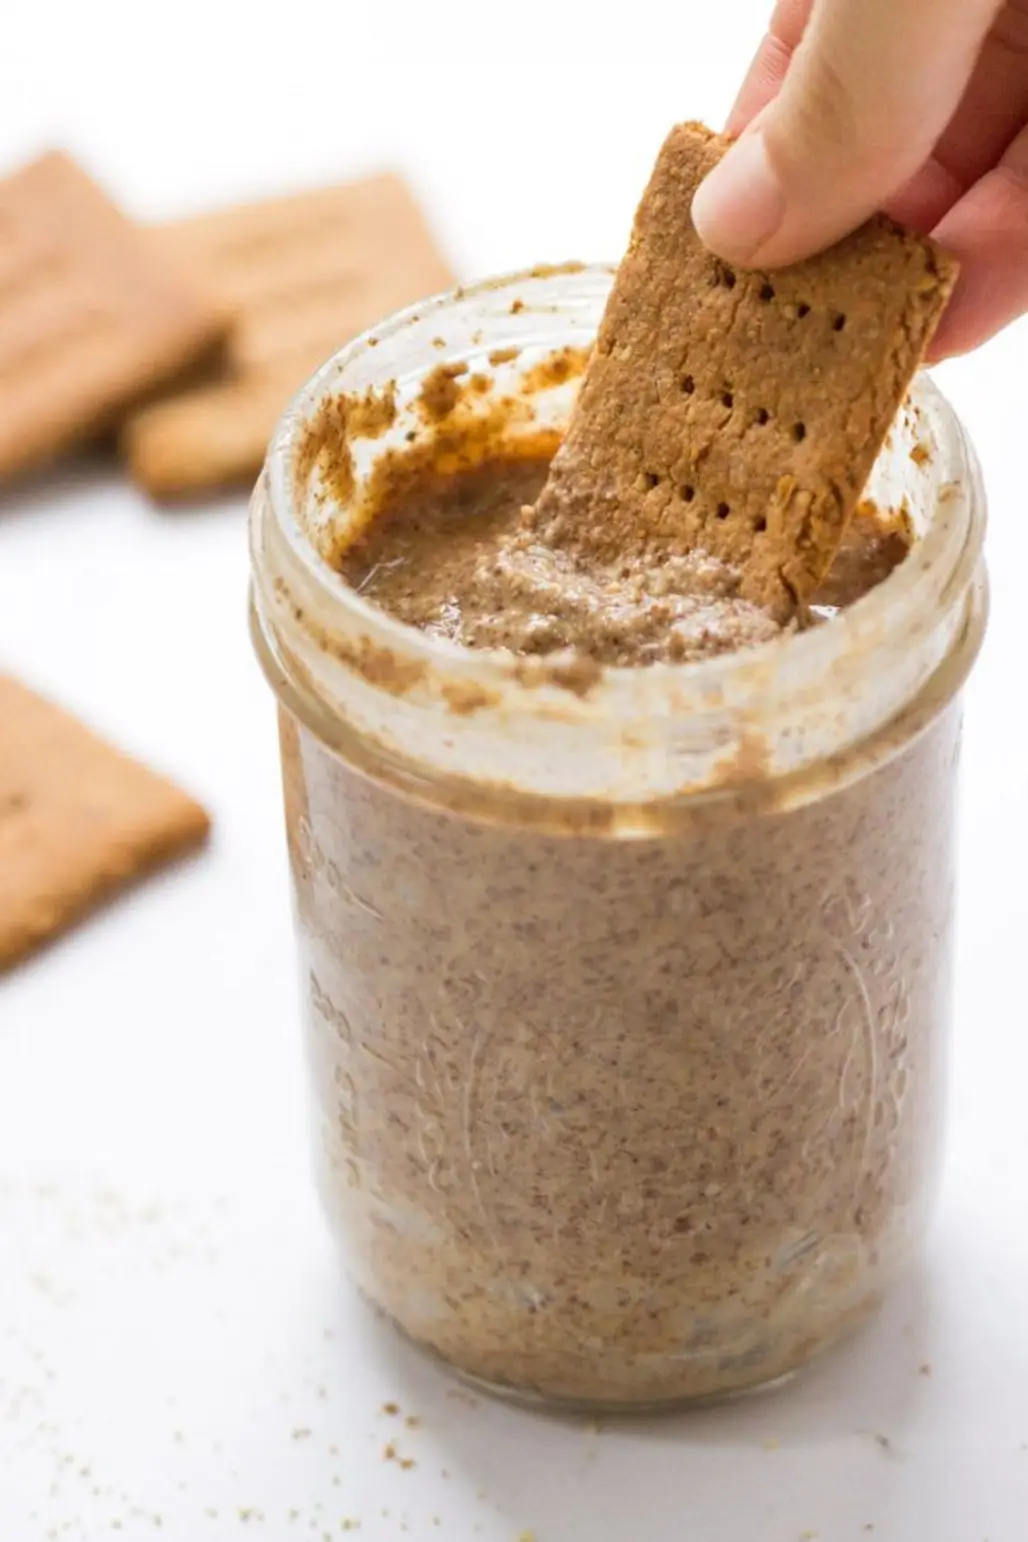 Whole Grain Crackers and Nut Butter